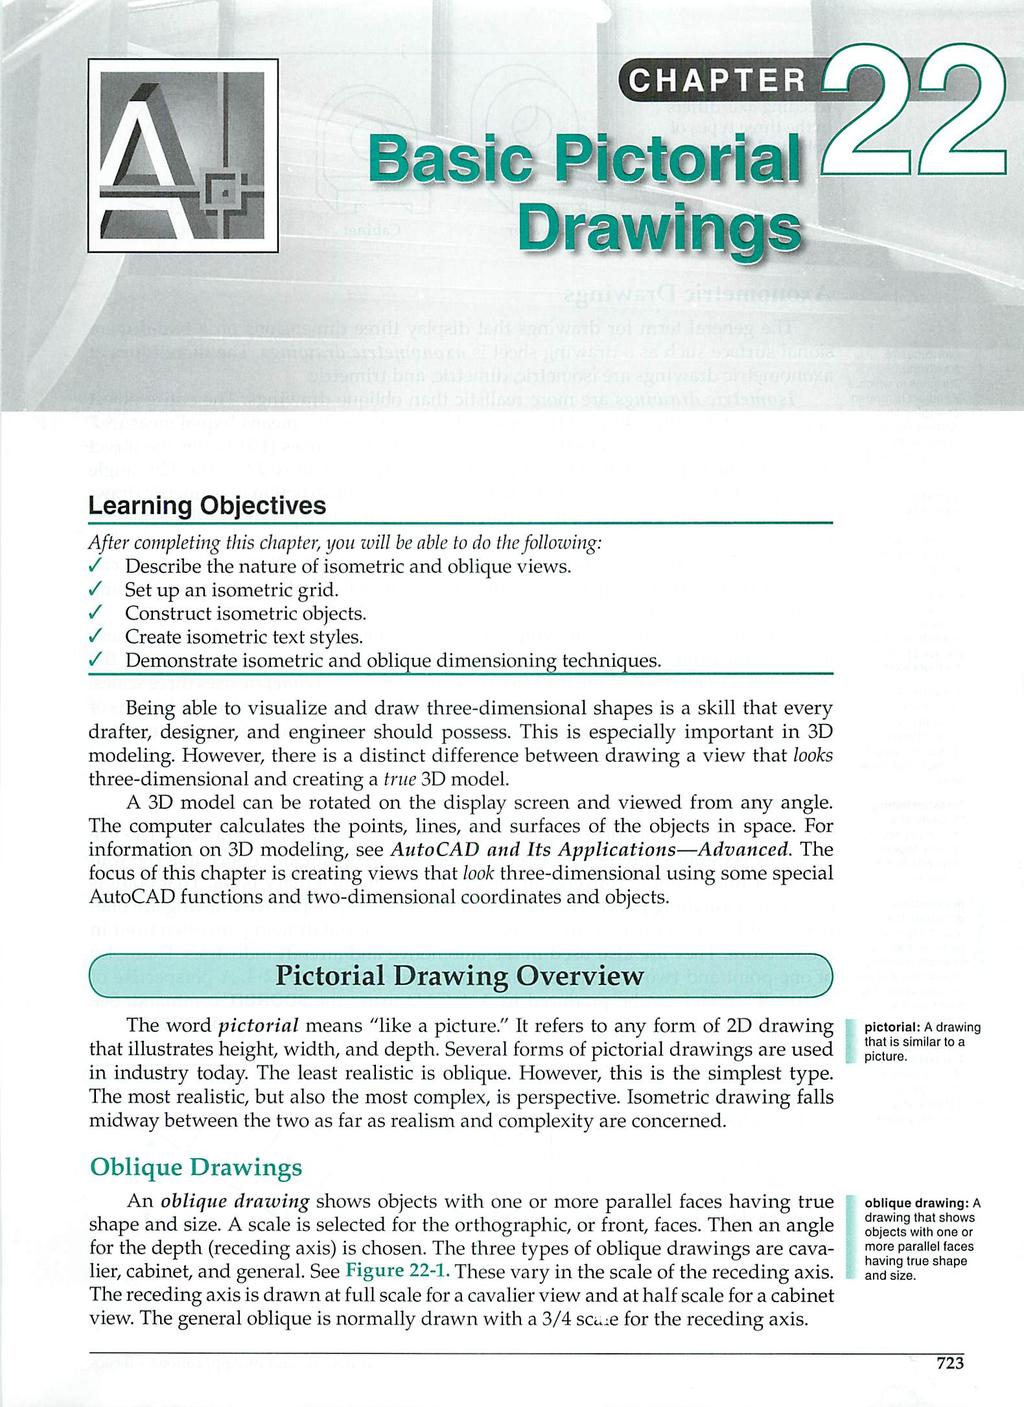 Learning Objectives After completing this chapter, you will be able to do thefollowing: Describe the nature of isometric and oblique views. Set up an isometric grid. Construct isometric objects.